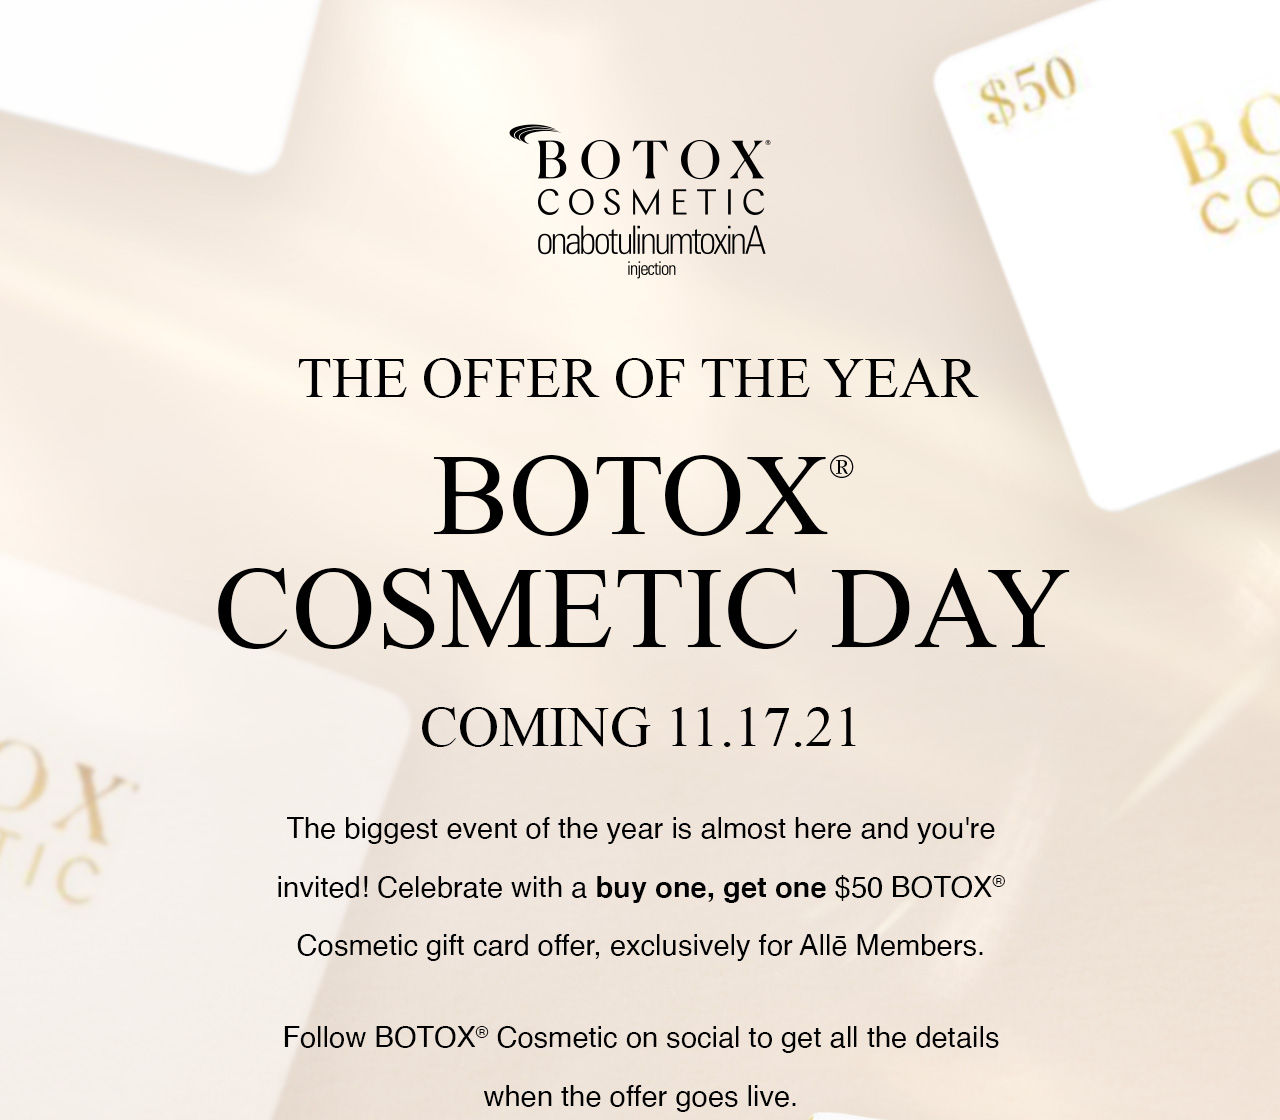 Botox Cosmetic Day